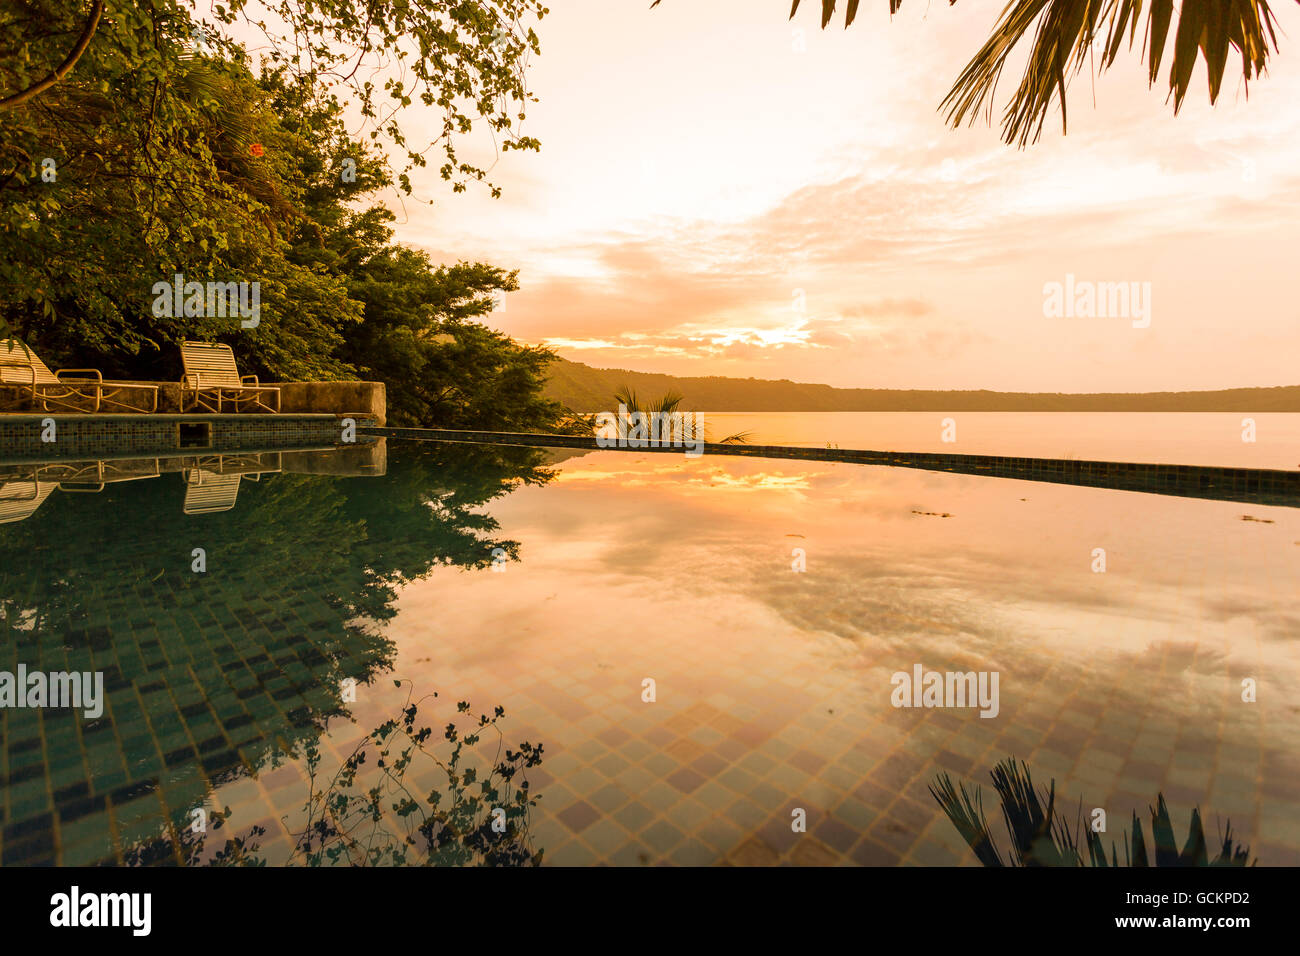 Apoyo Lagoon, Nicaragua - June 2016. Sunrise view from one of the pools of Selva Azul Resort. Stock Photo